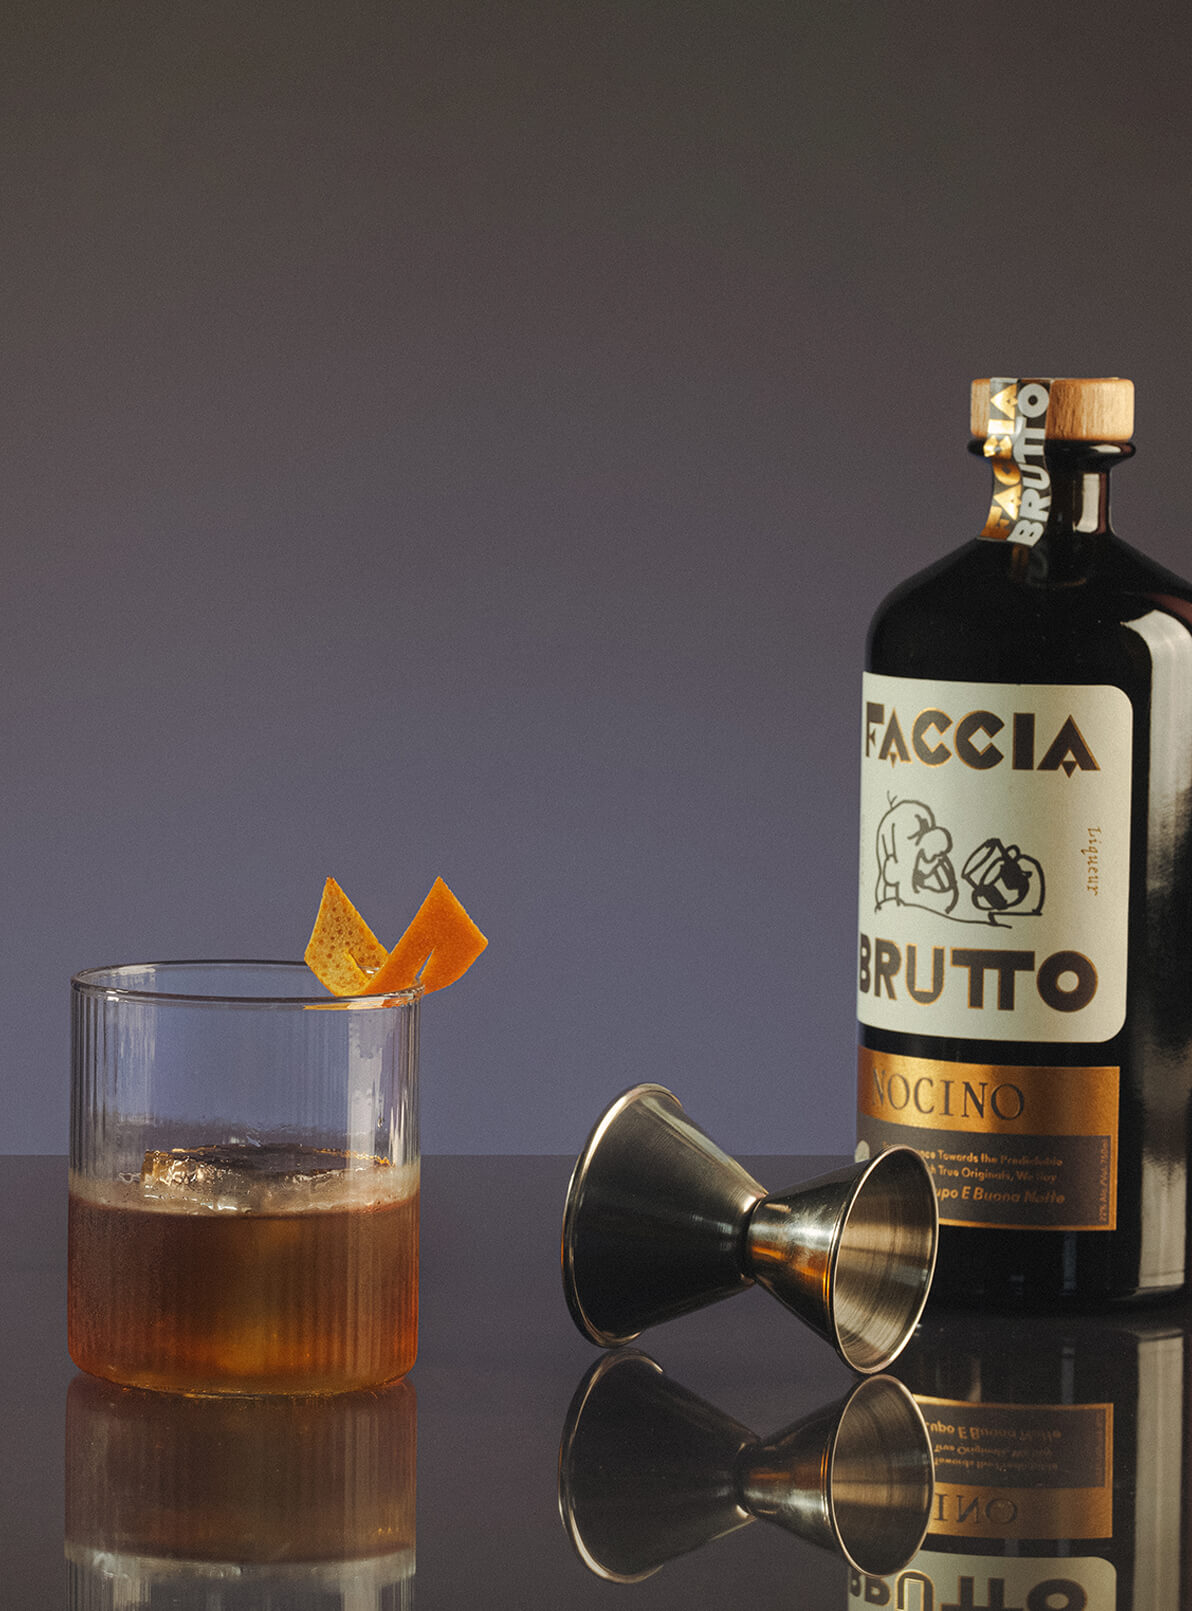 Cocktail with orange peel, jigger and bottle of Faccia Brutto Nocino